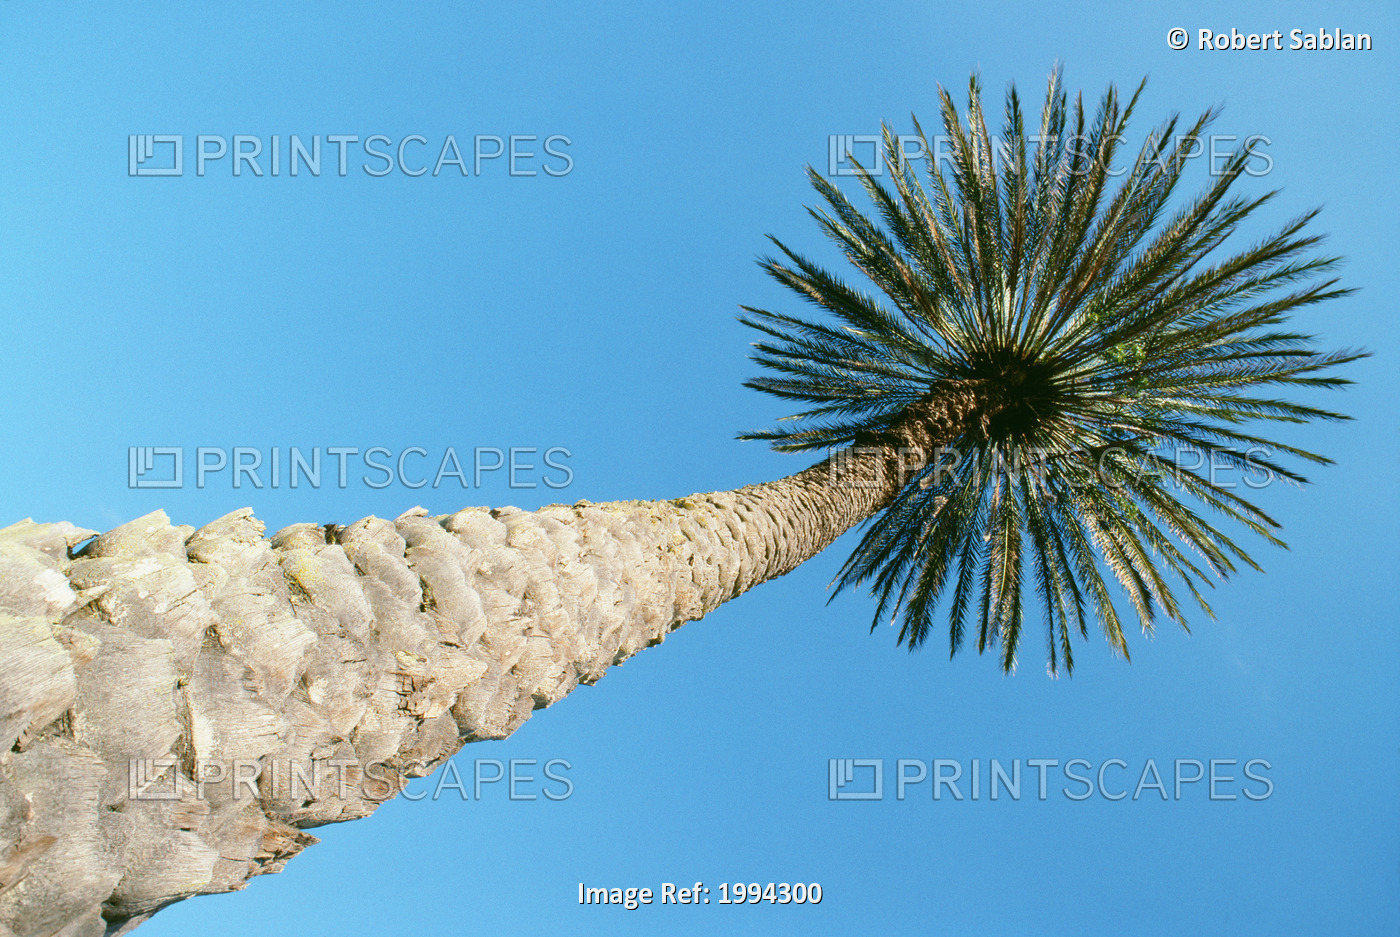 Upward View Of Tall Palm Tree, Thick Bark, Blue Sky In Background